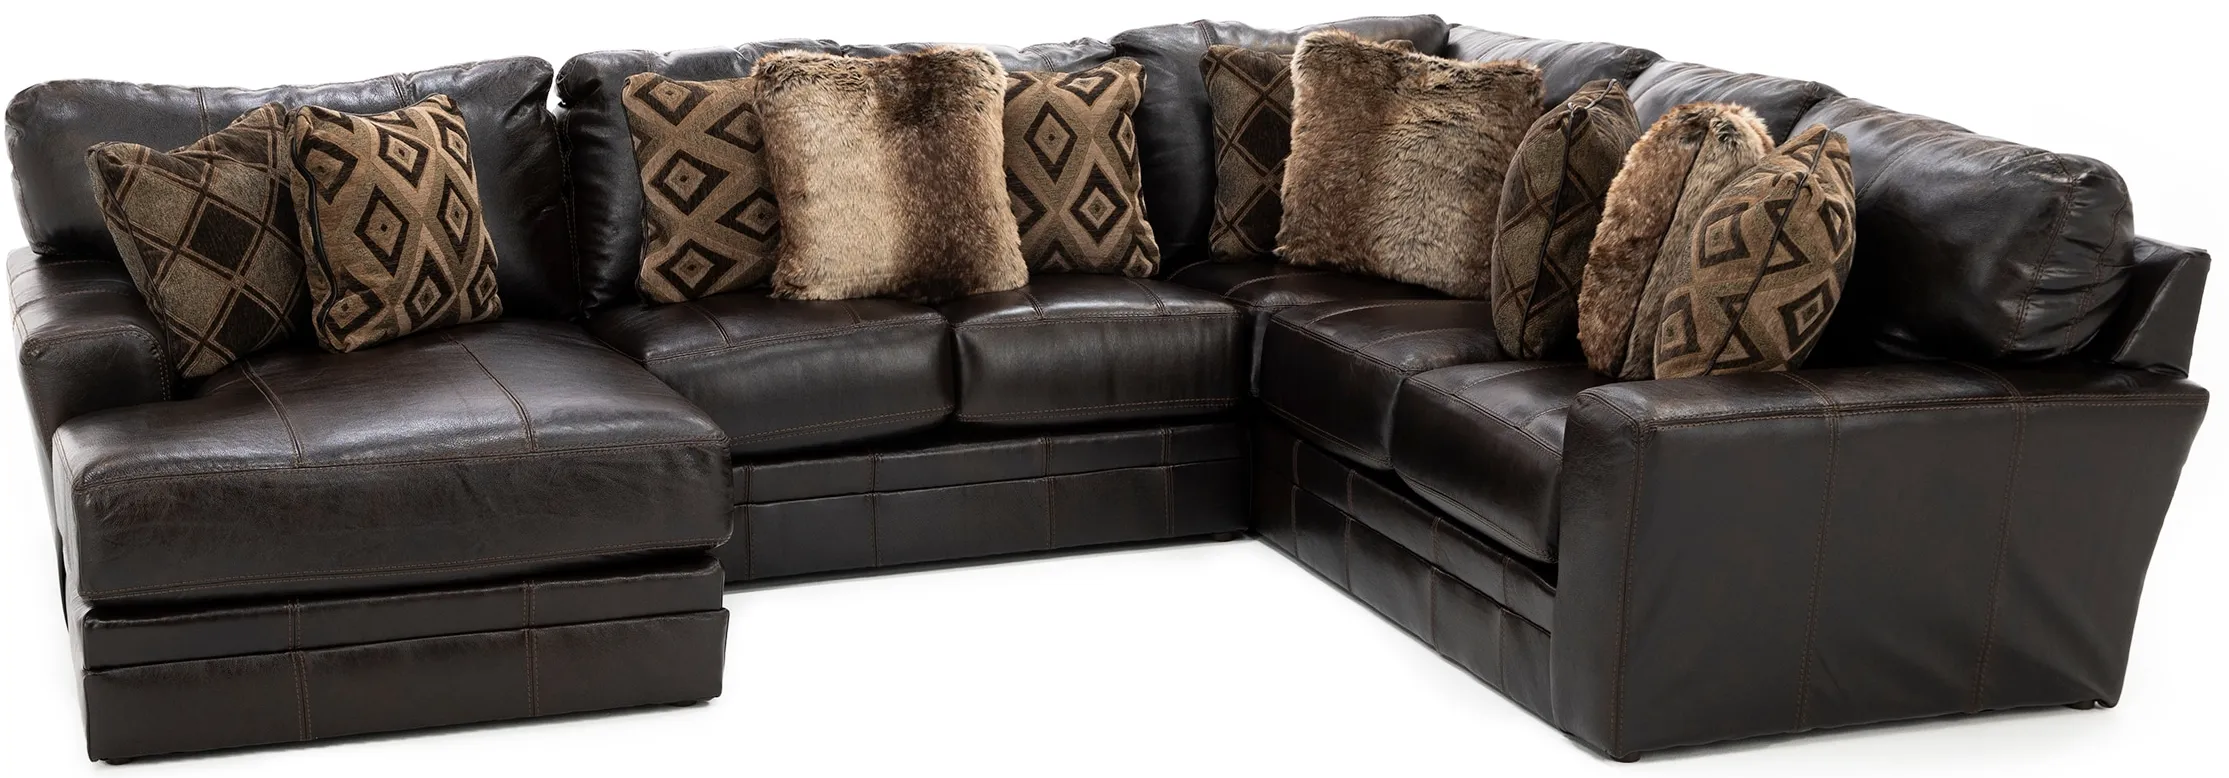 Camden 3-Pc. Leather Sectional with Left Arm facing Chaise in Chocolate